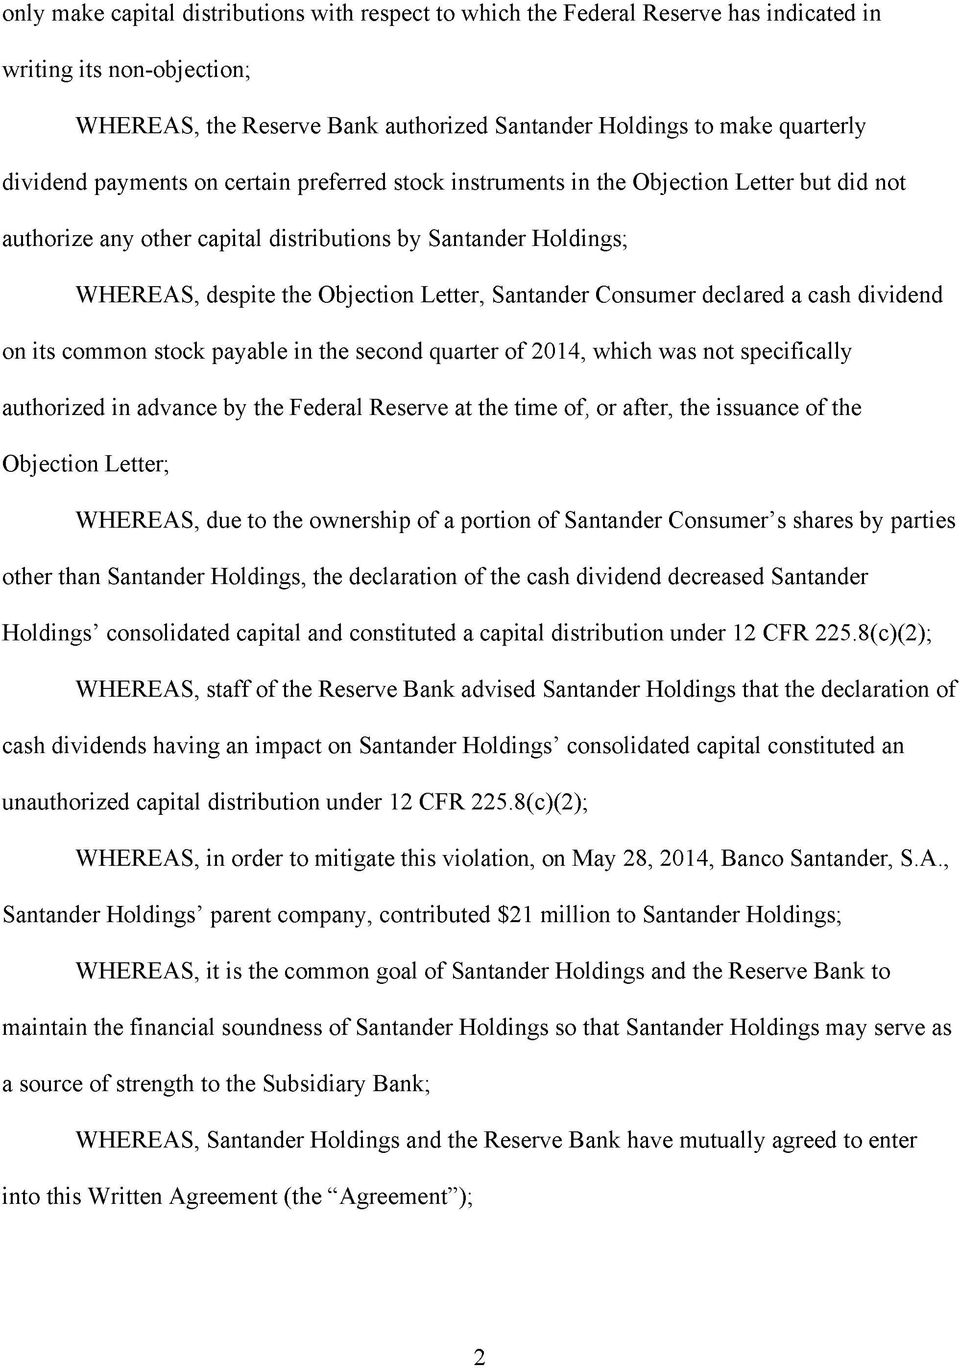 Santander Consumer declared a cash dividend on its common stock payable in the second quarter of 2014, which was not specifically authorized in advance by the Federal Reserve at the time of, or